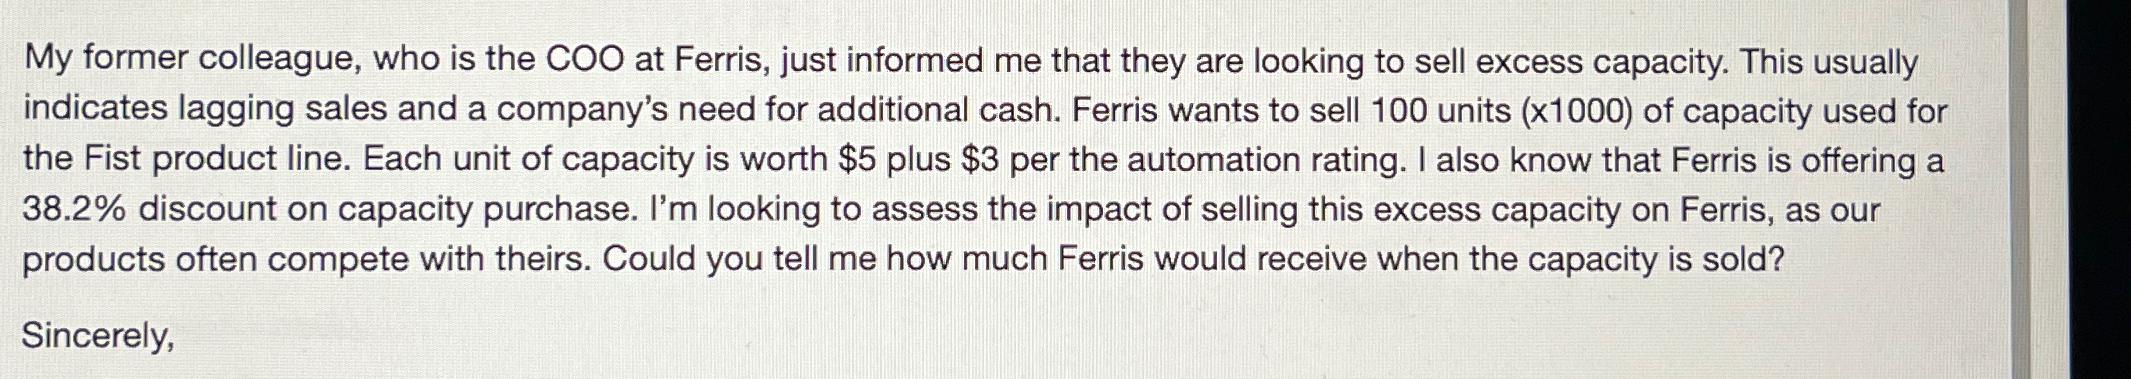 My former colleague, who is the COO at Ferris, just informed me that they are looking to sell excess